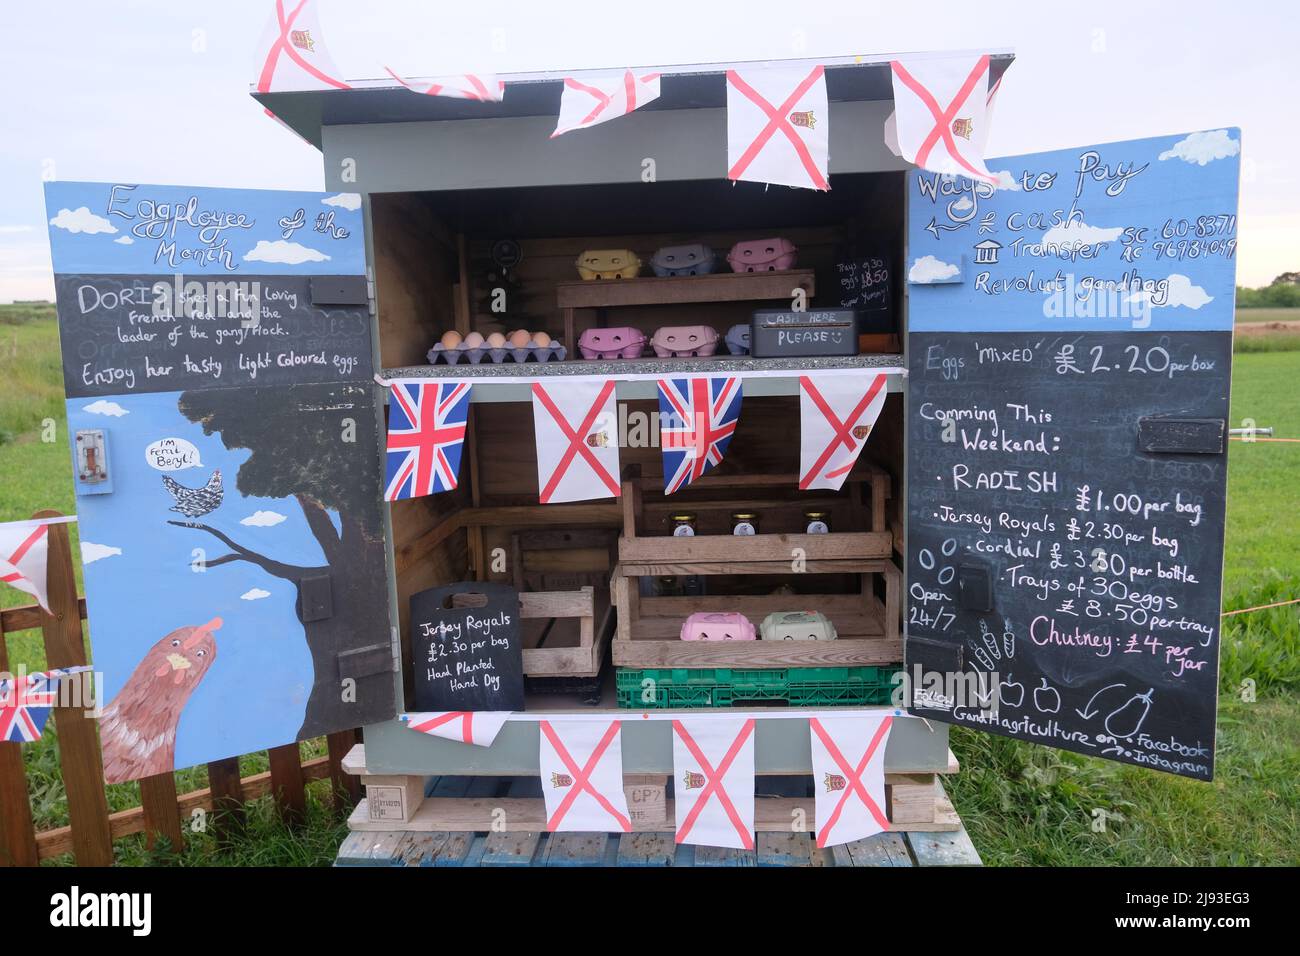 Unstaffed brightly painted honesty stall belonging to G & H Agriculture selling hedge veg St Peter, Jersey, Channel Islands flags for Liberation Day Stock Photo